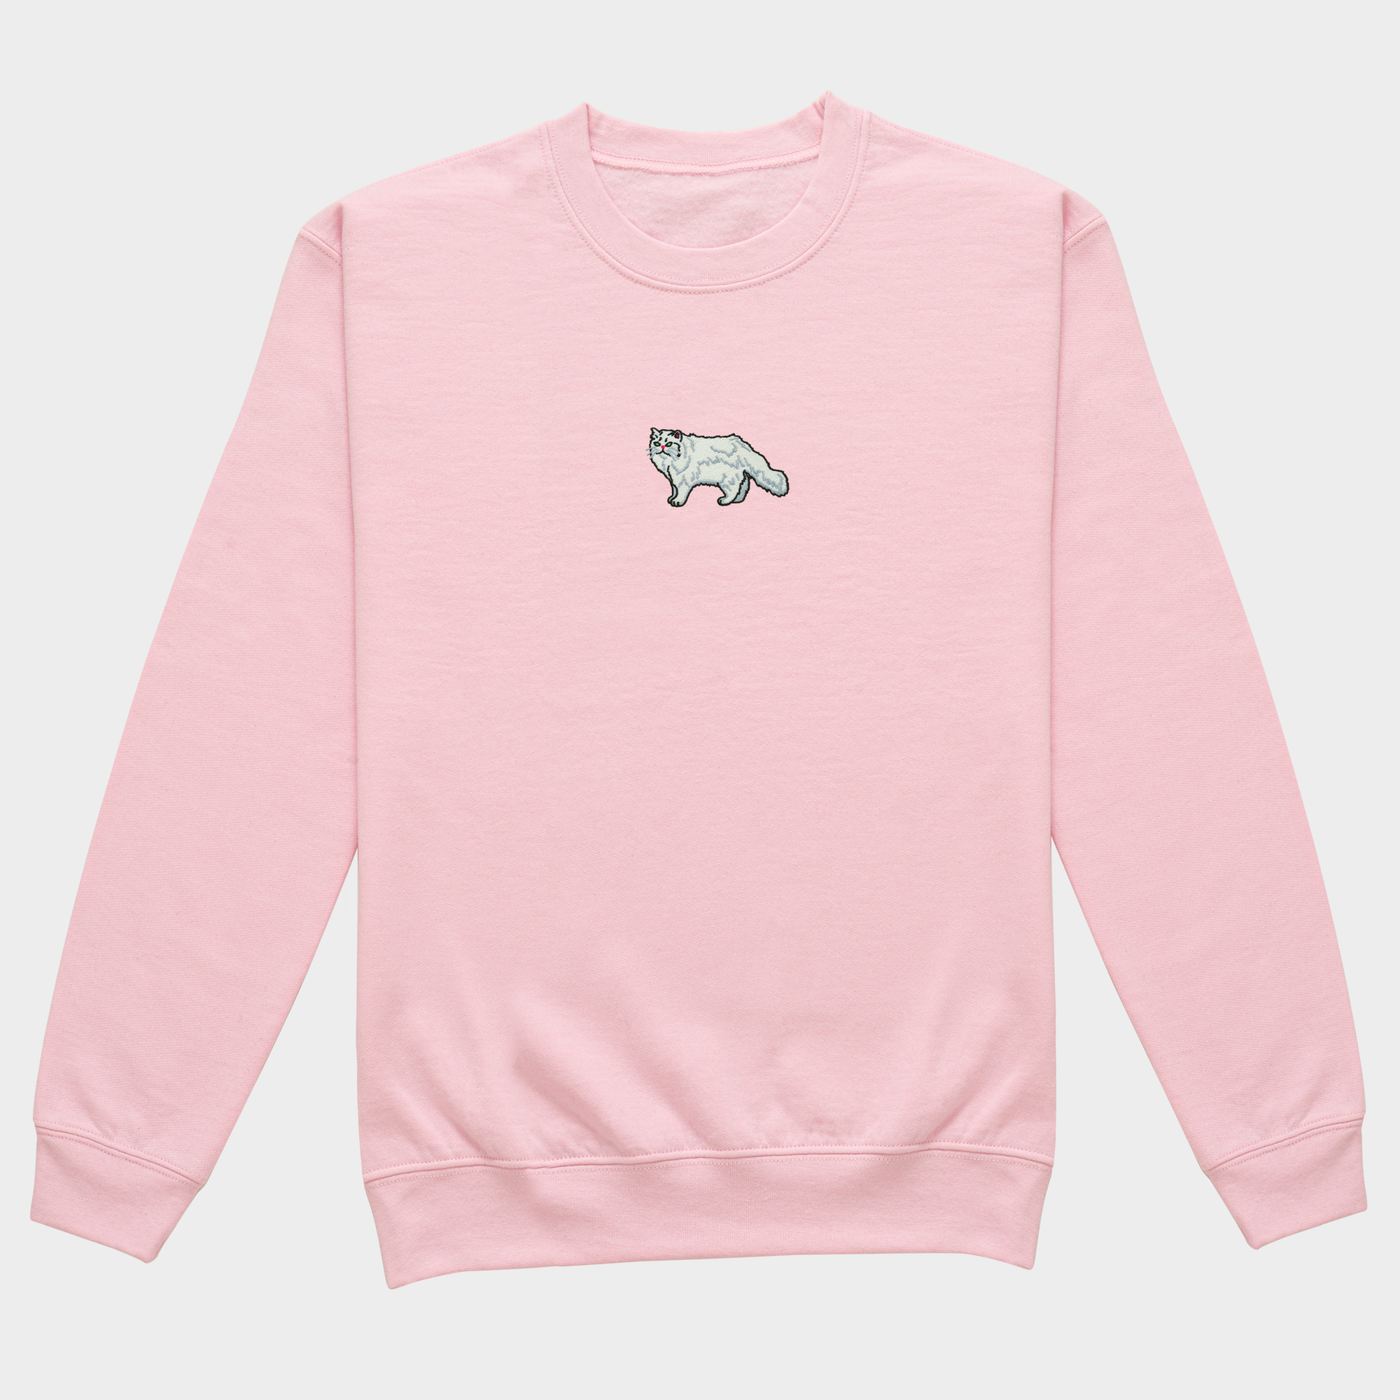 Bobby's Planet Women's Embroidered Persian Sweatshirt from Paws Dog Cat Animals Collection in Light Pink Color#color_light-pink